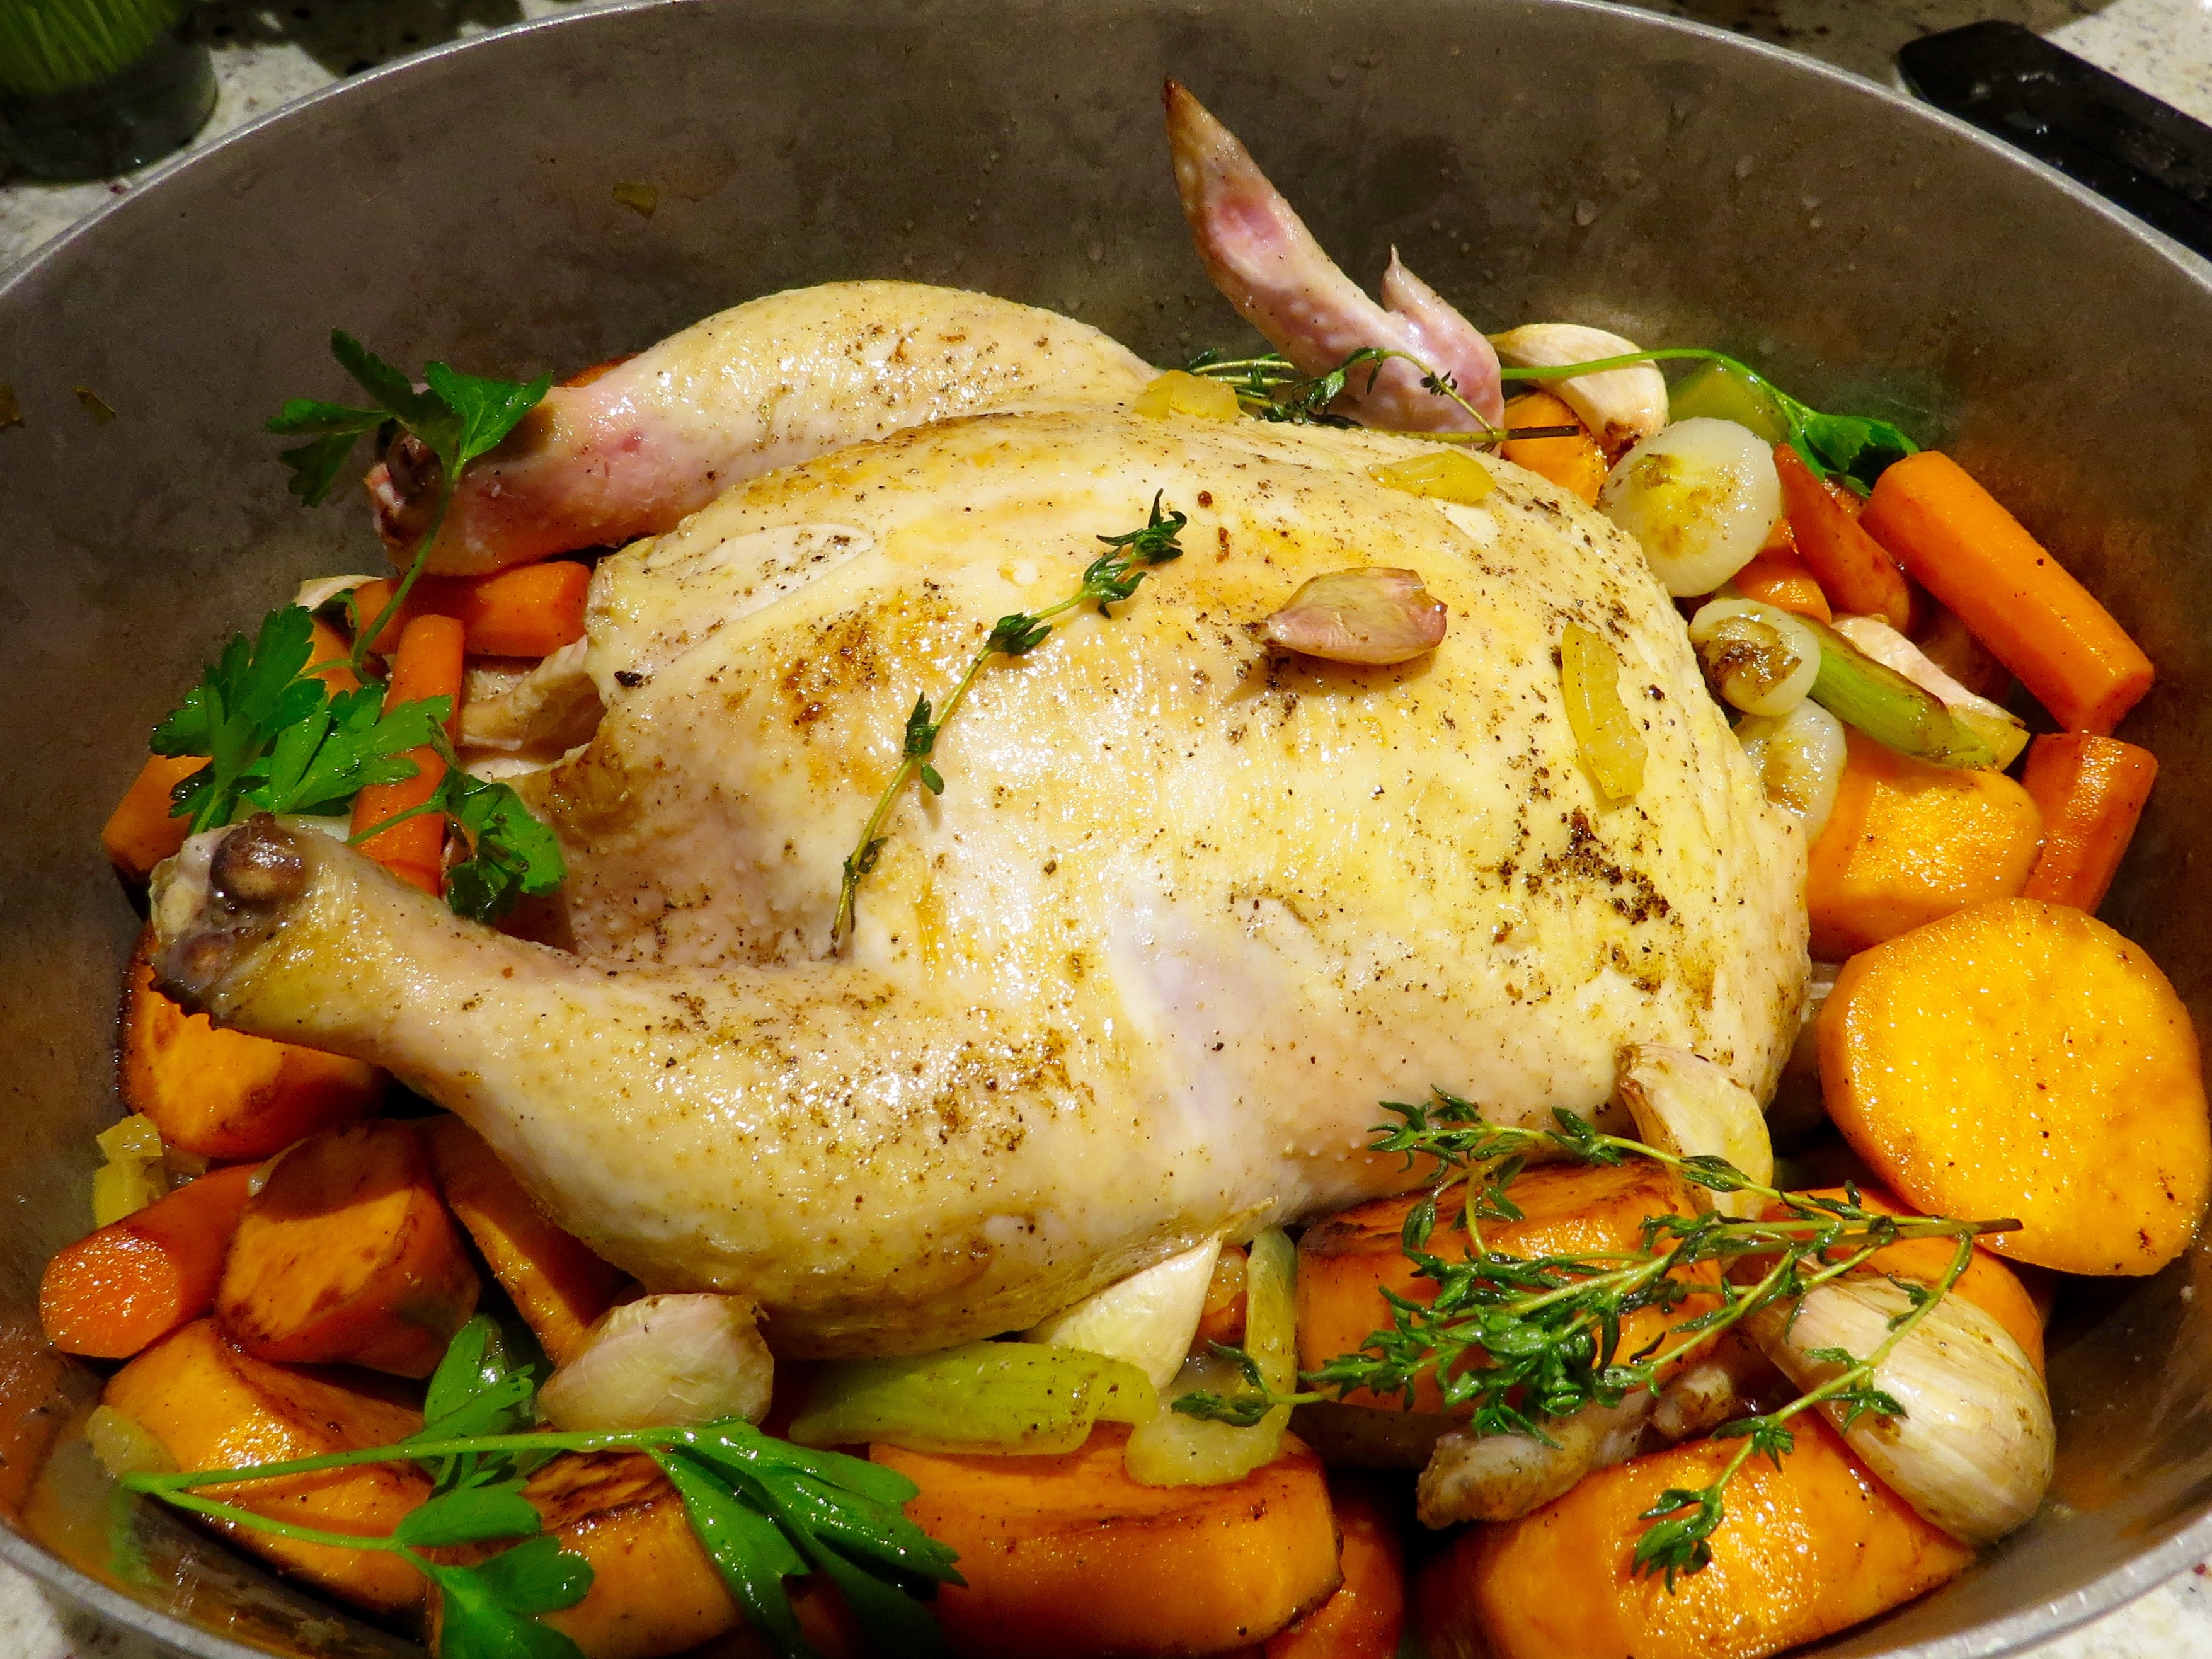 After the chicken is browned on all sides, it joins its veggie friends for a roast in the oven.